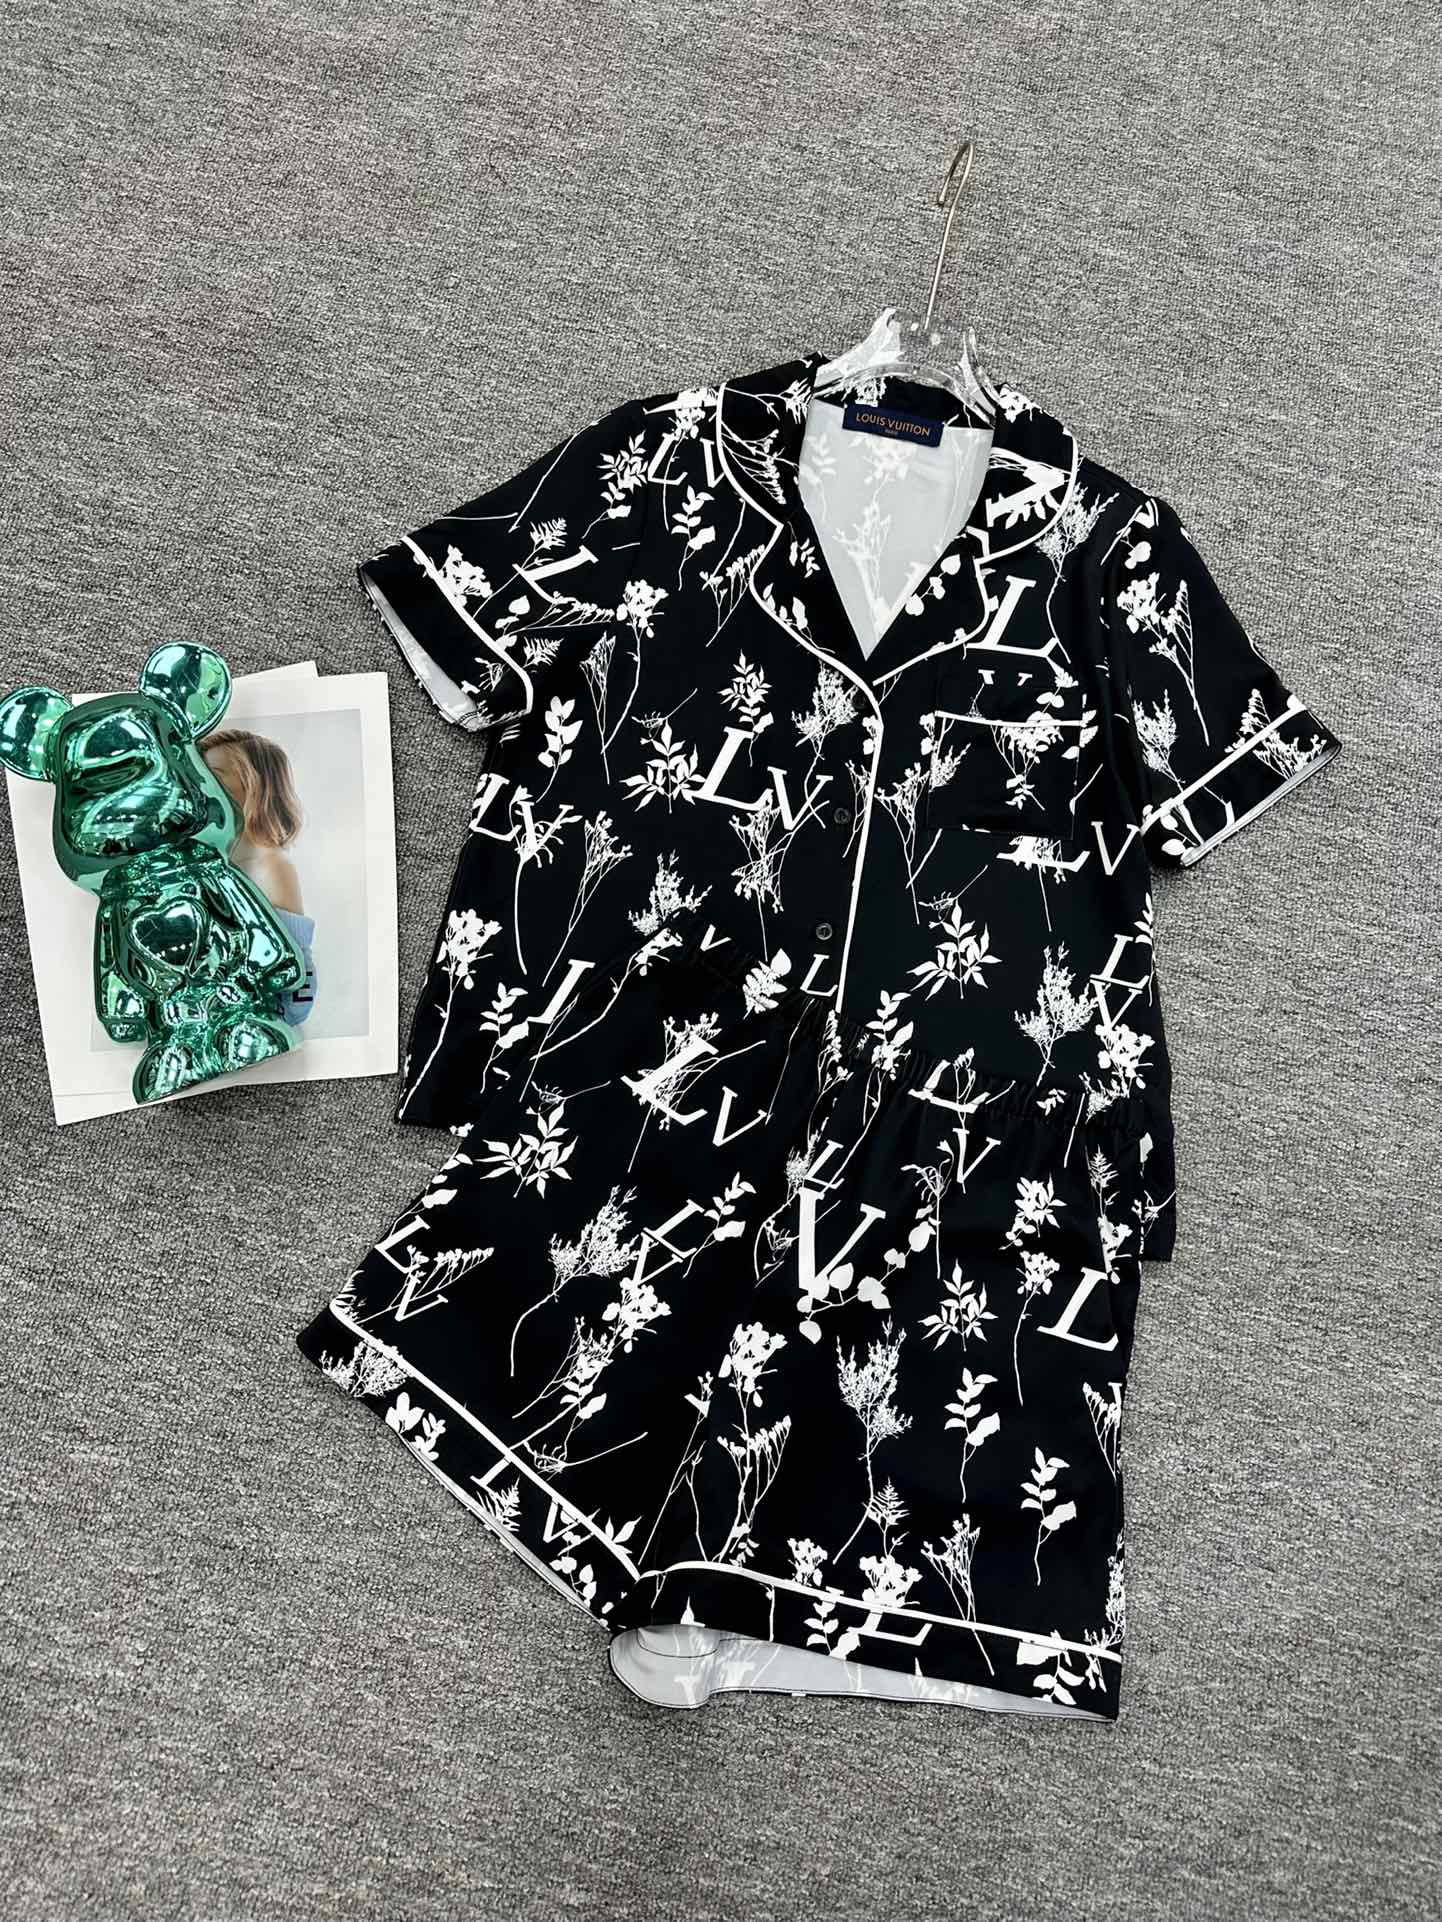 Louis Vuitton Clothing Pajamas Outlet 1:1 Replica
 Printing Summer Collection